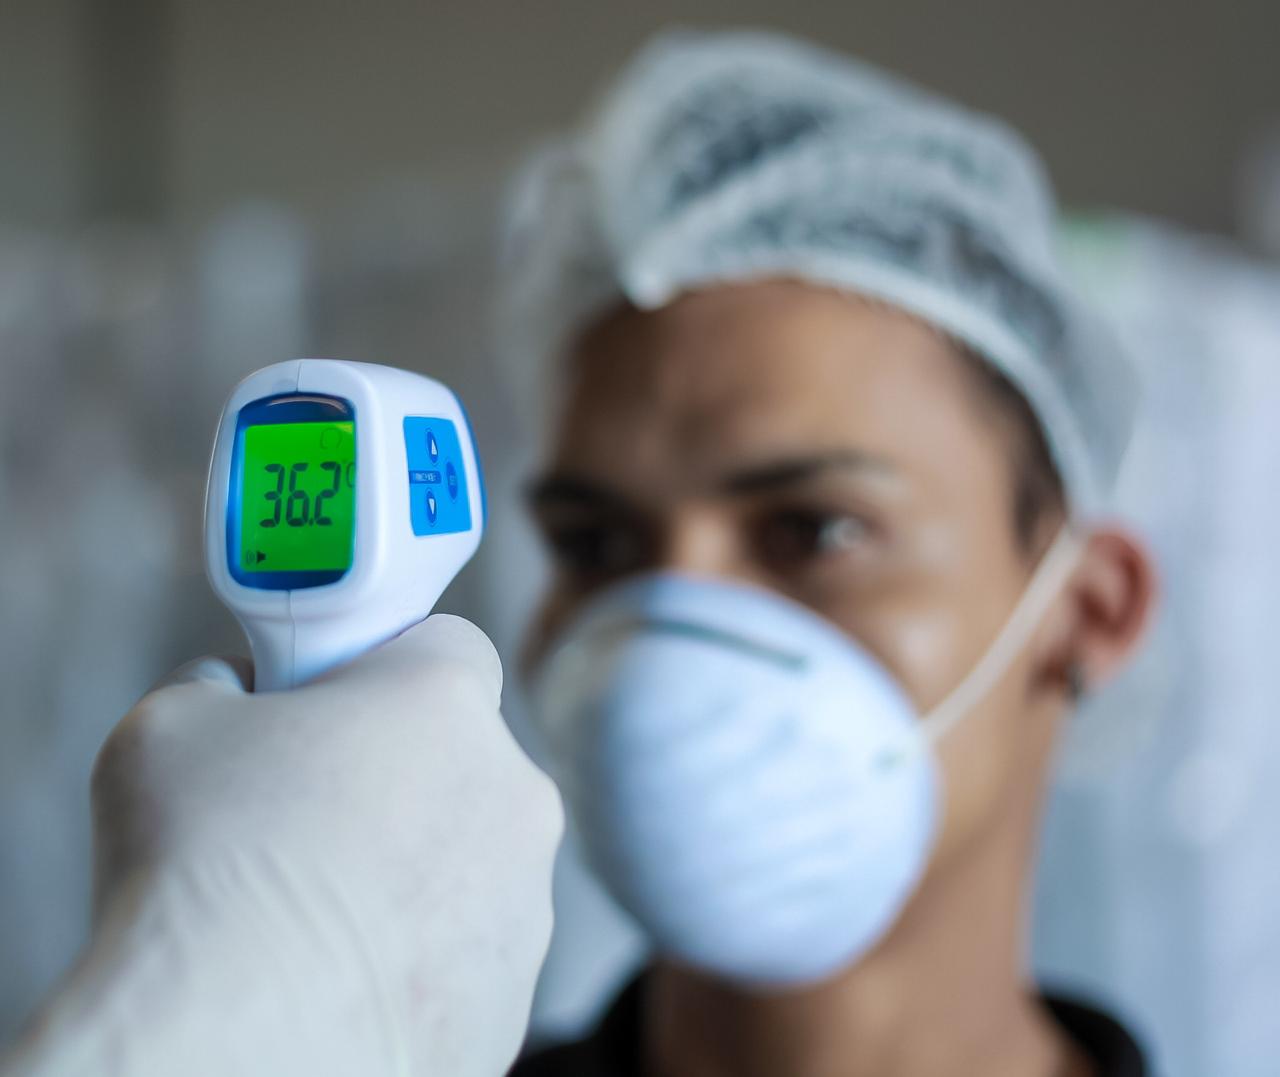 A worker being scanned with a non-contact thermometer to measure his tempreture to work in the hygiene factory